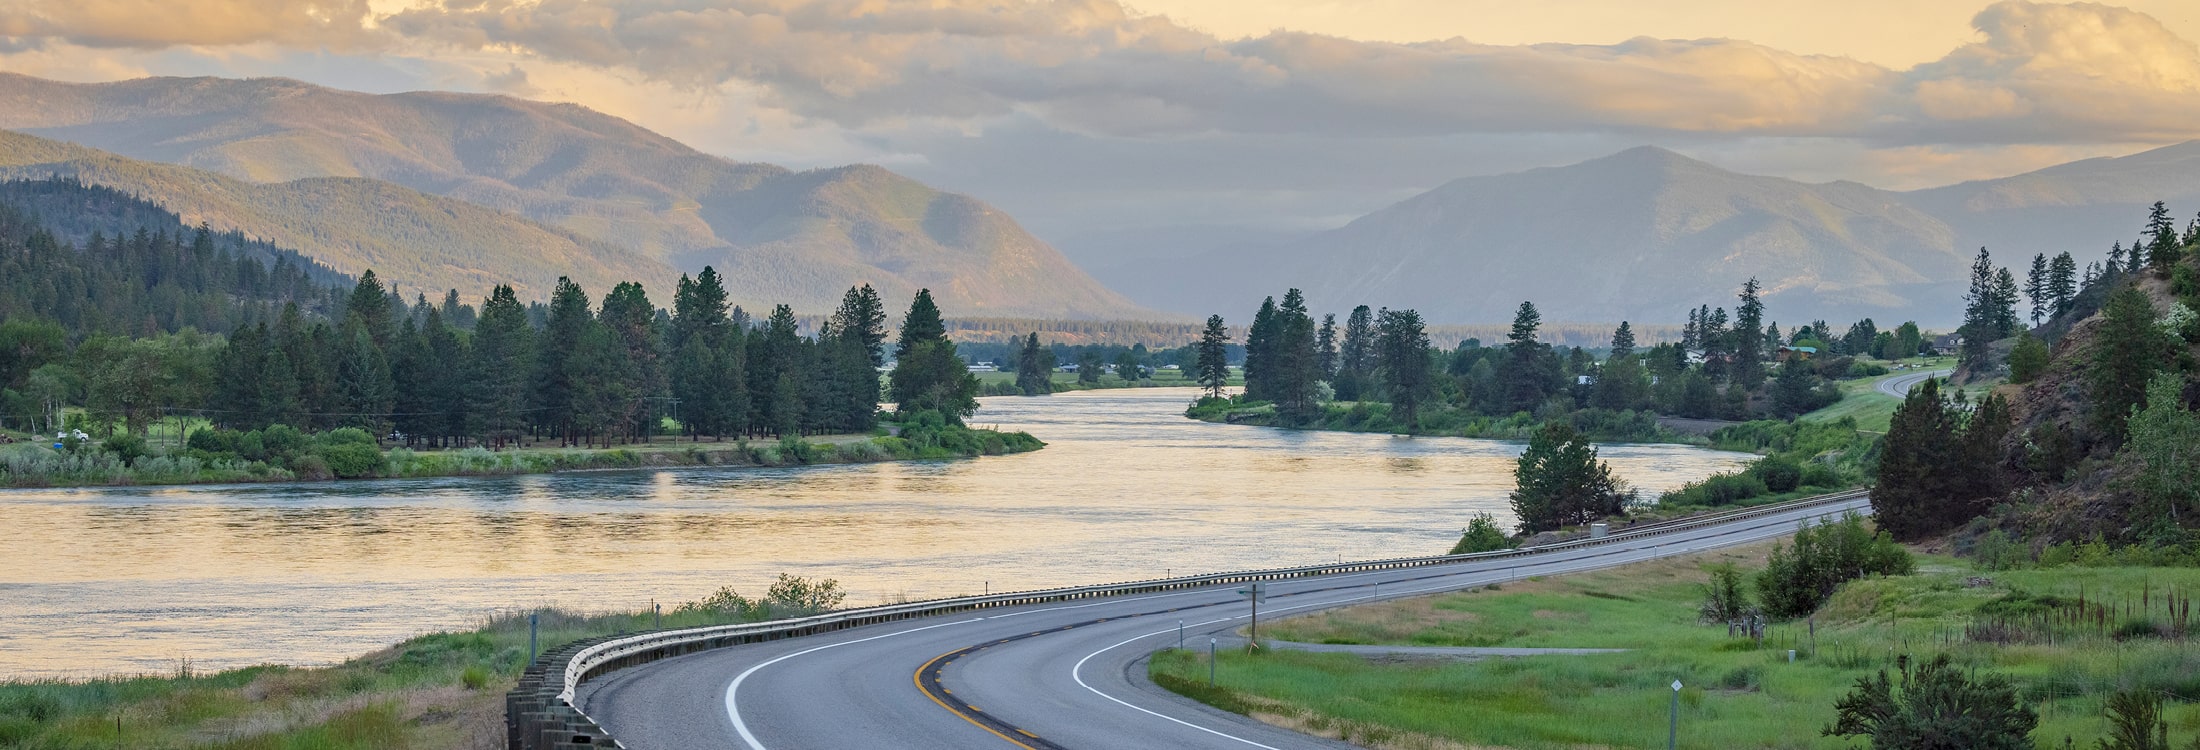 Travel Western Montana's scenic byways by car or motorcycle in the fall.